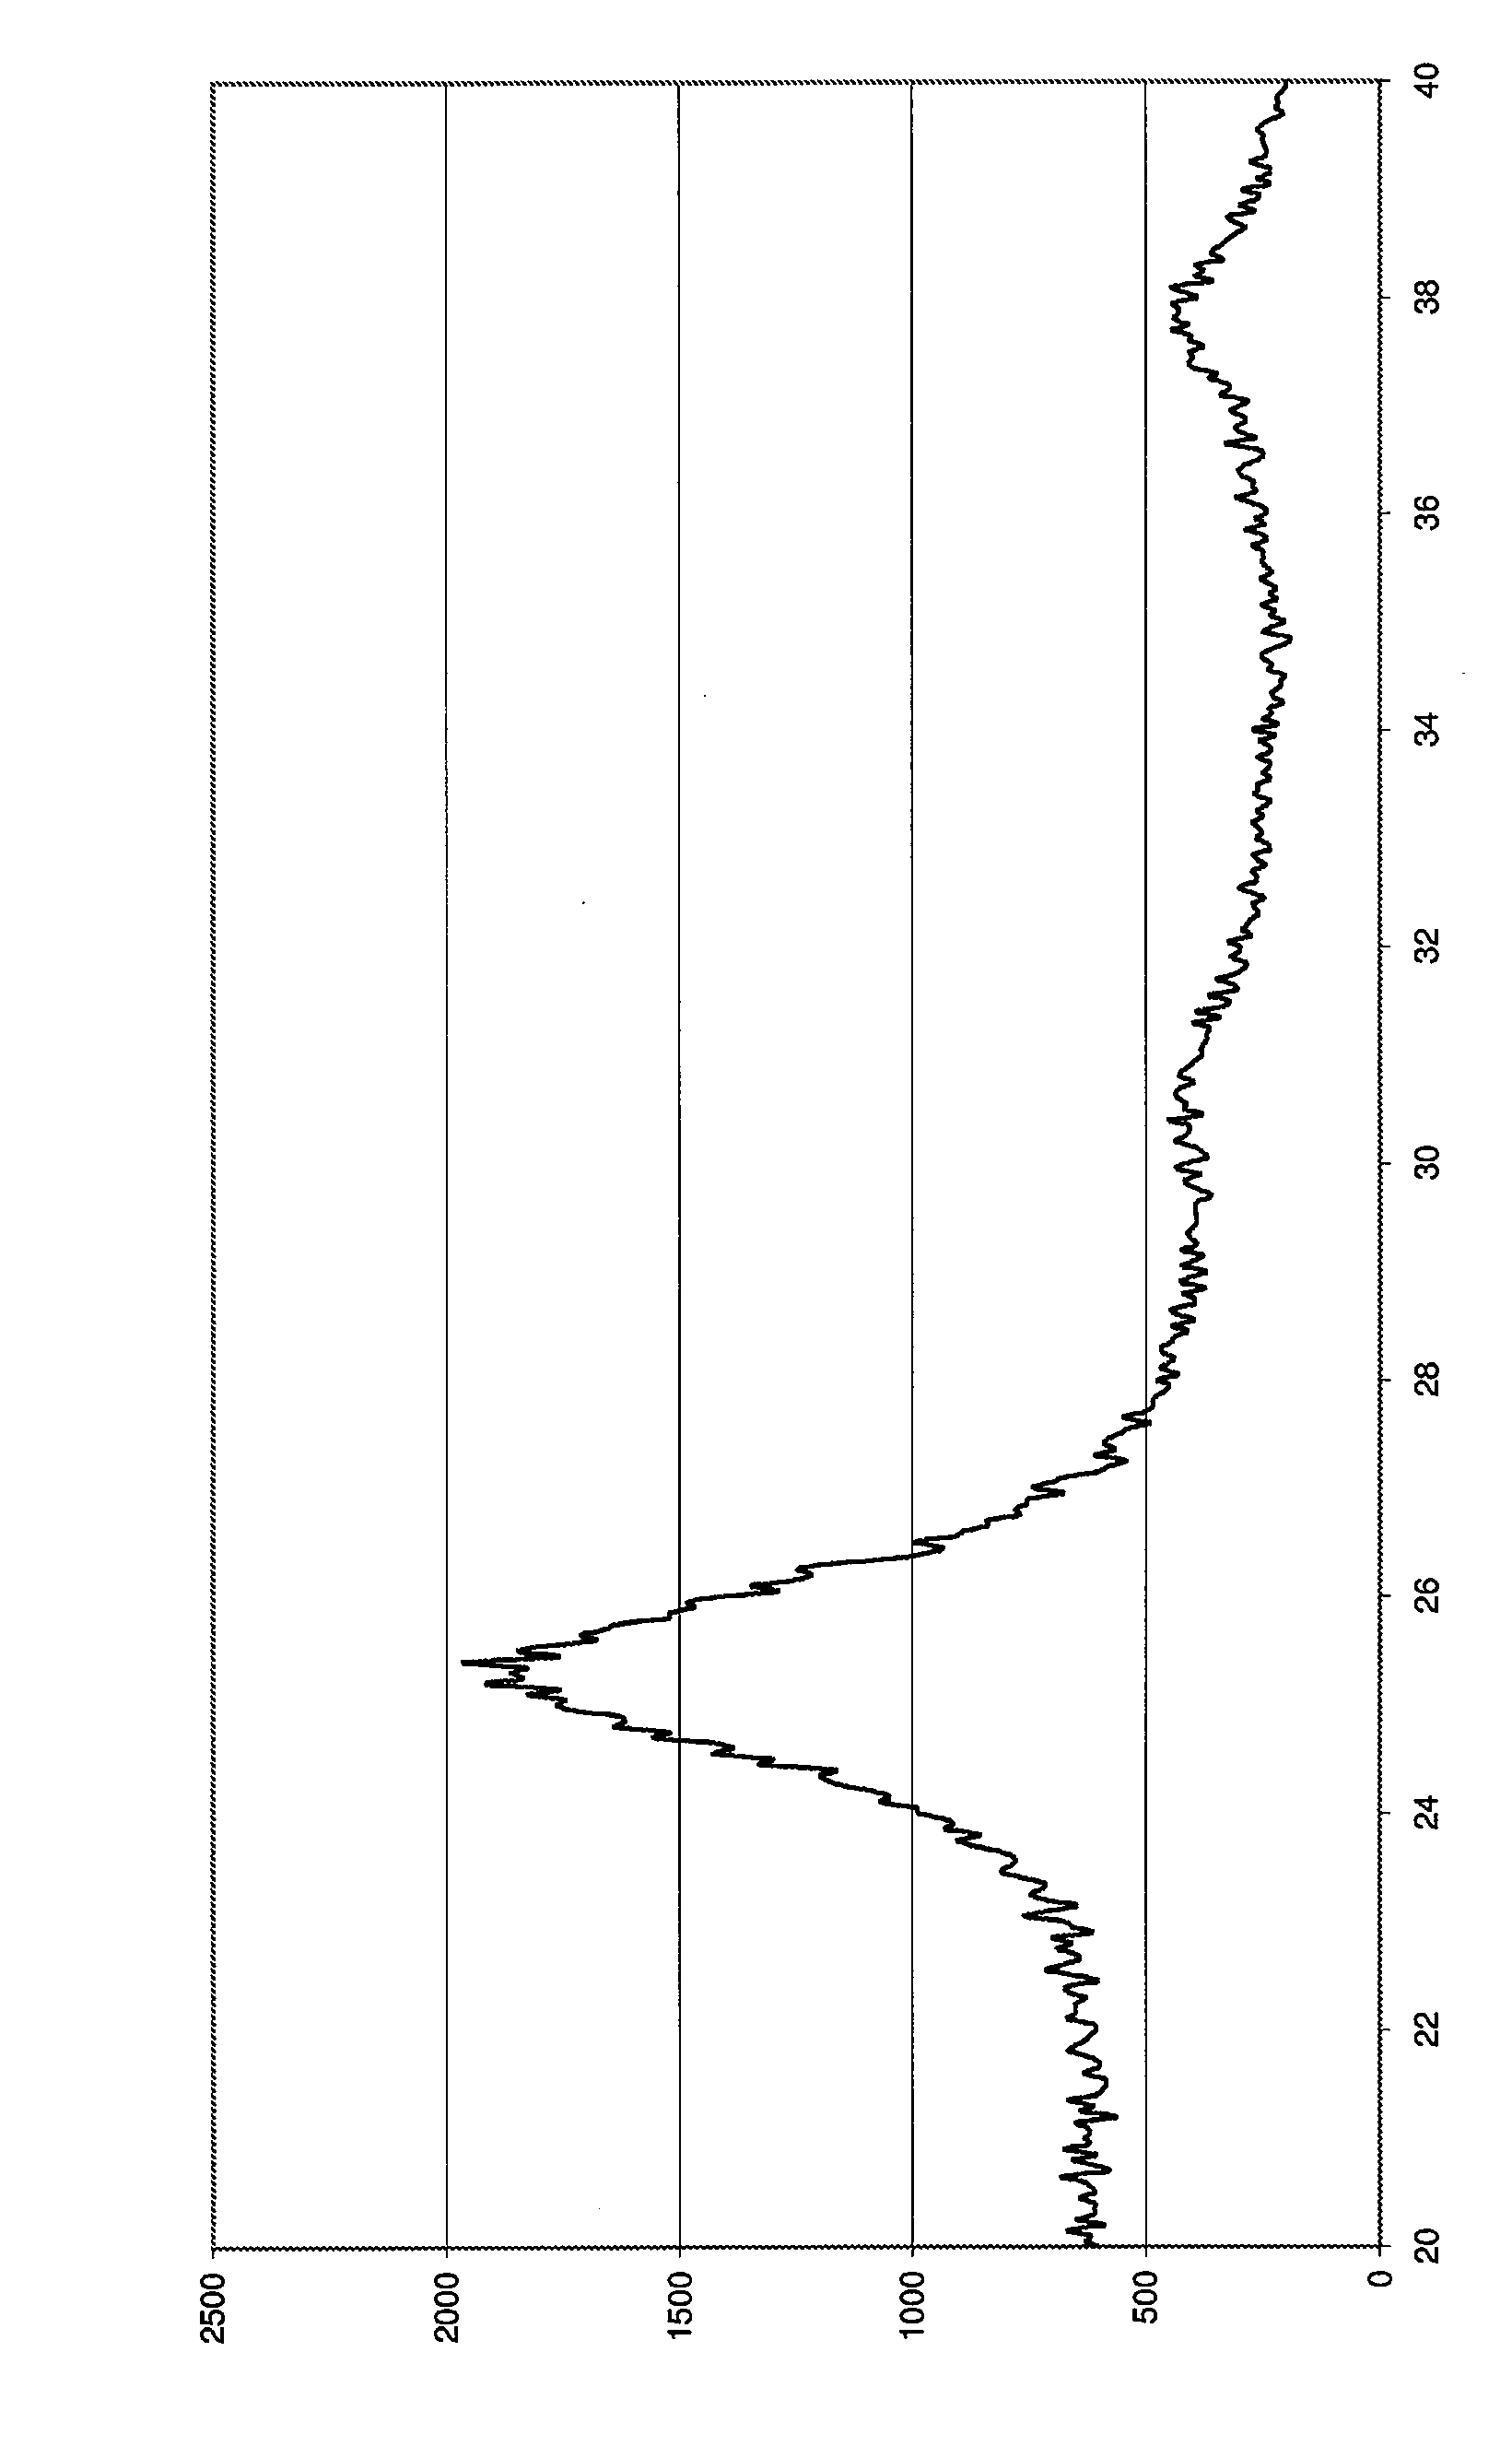 Method for the preparation of aqueous dispersions of TiO2 in the form of nanoparticles, and dispersions obtainable with this method